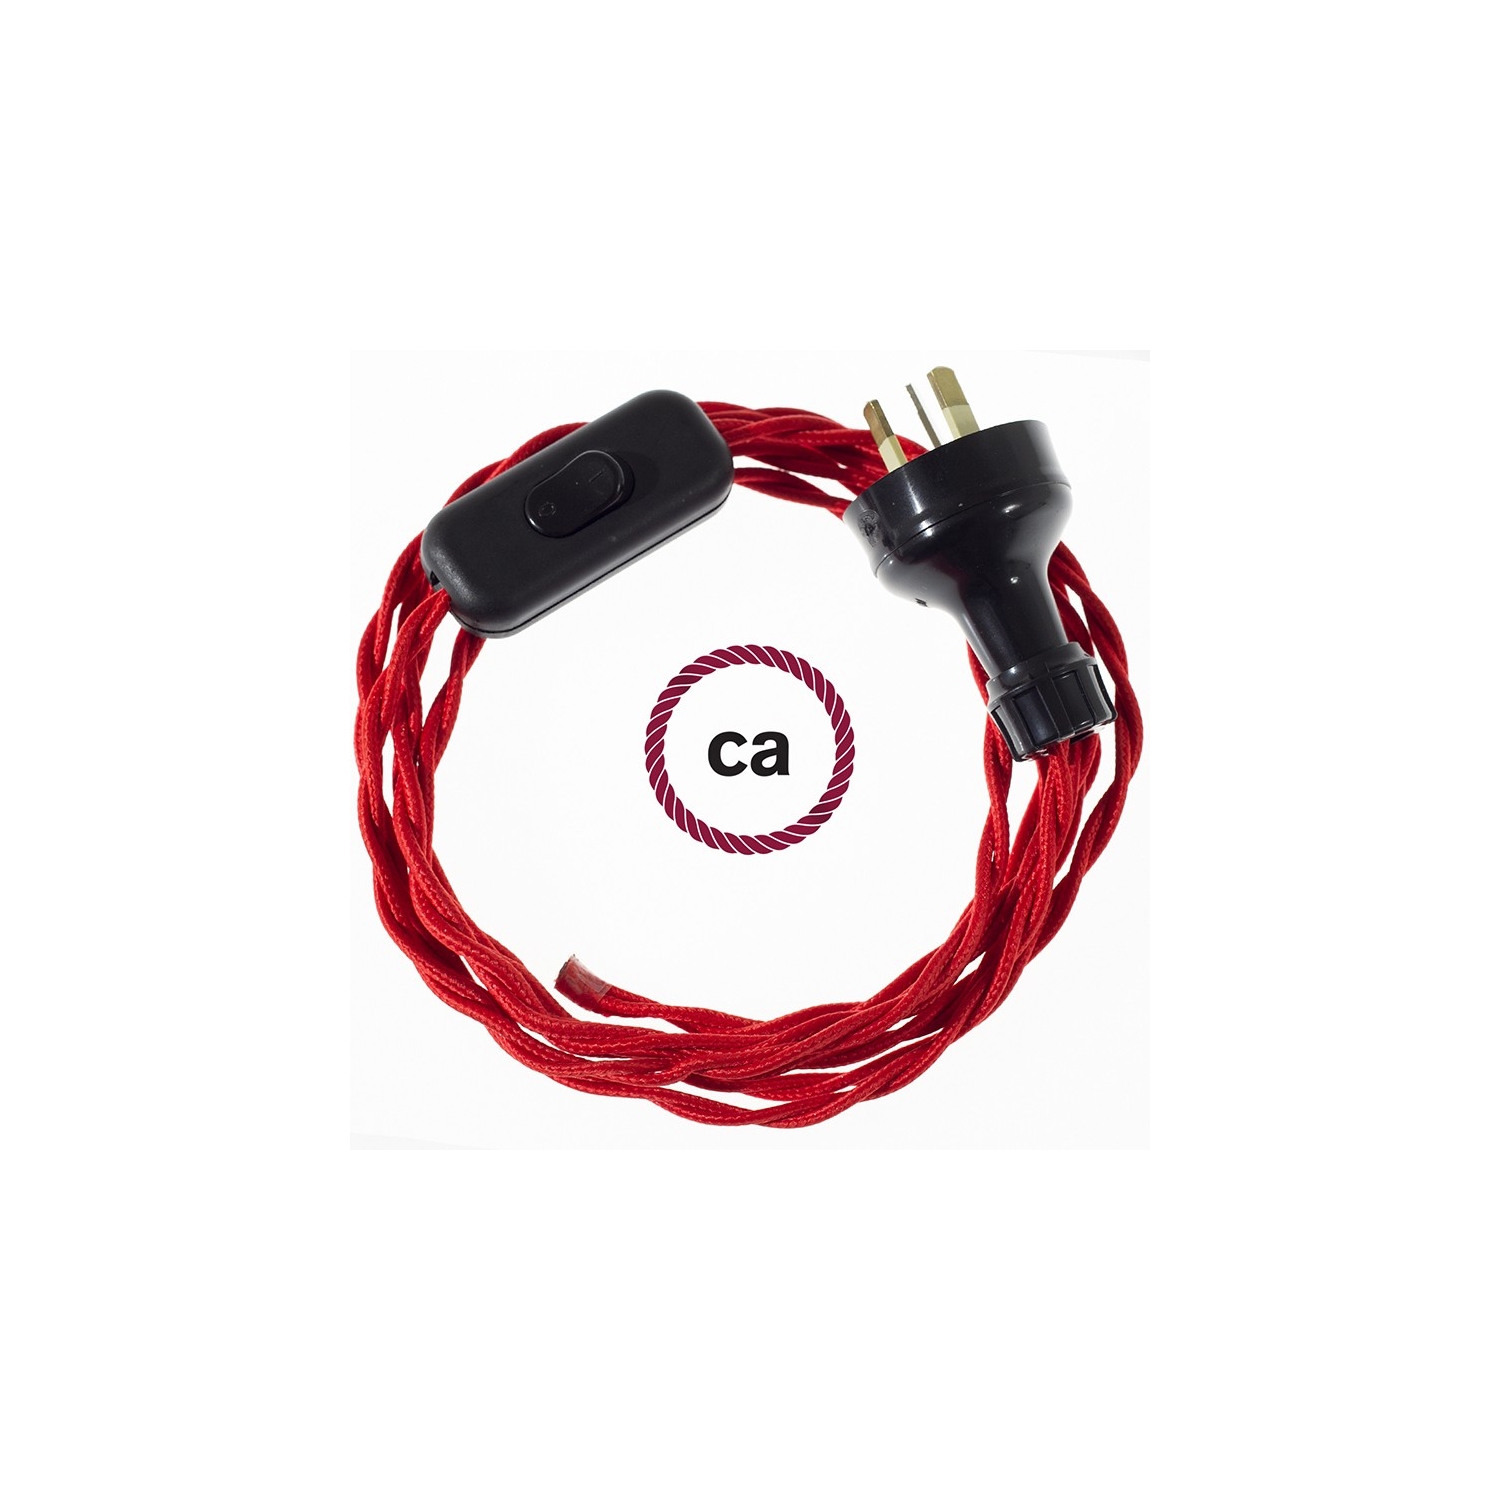 Wiring Red Rayon textile cable TM09 - 1.80 mt